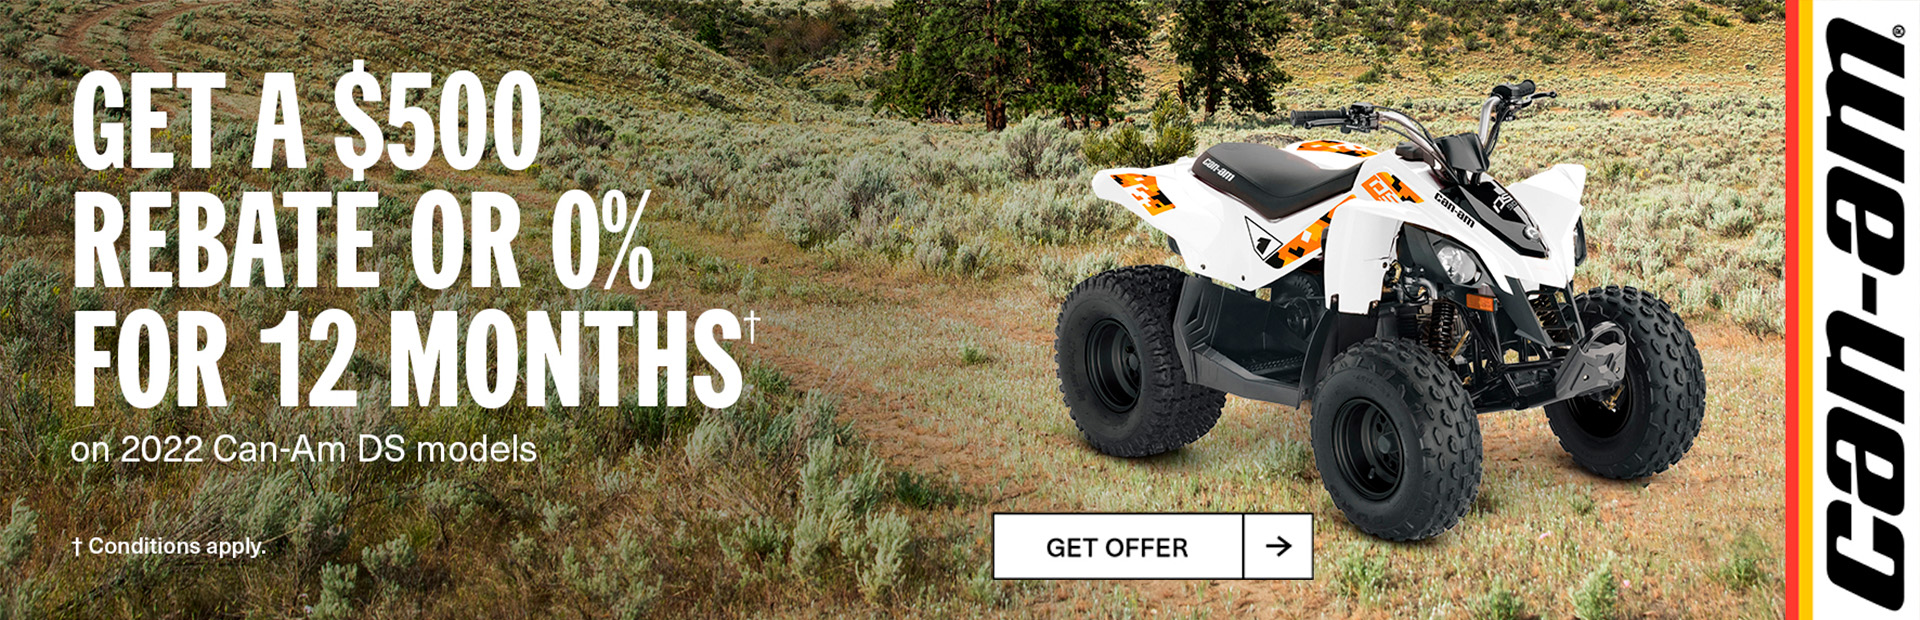 Can am Off Road - Retail Promotion at ATV Zone, LLC